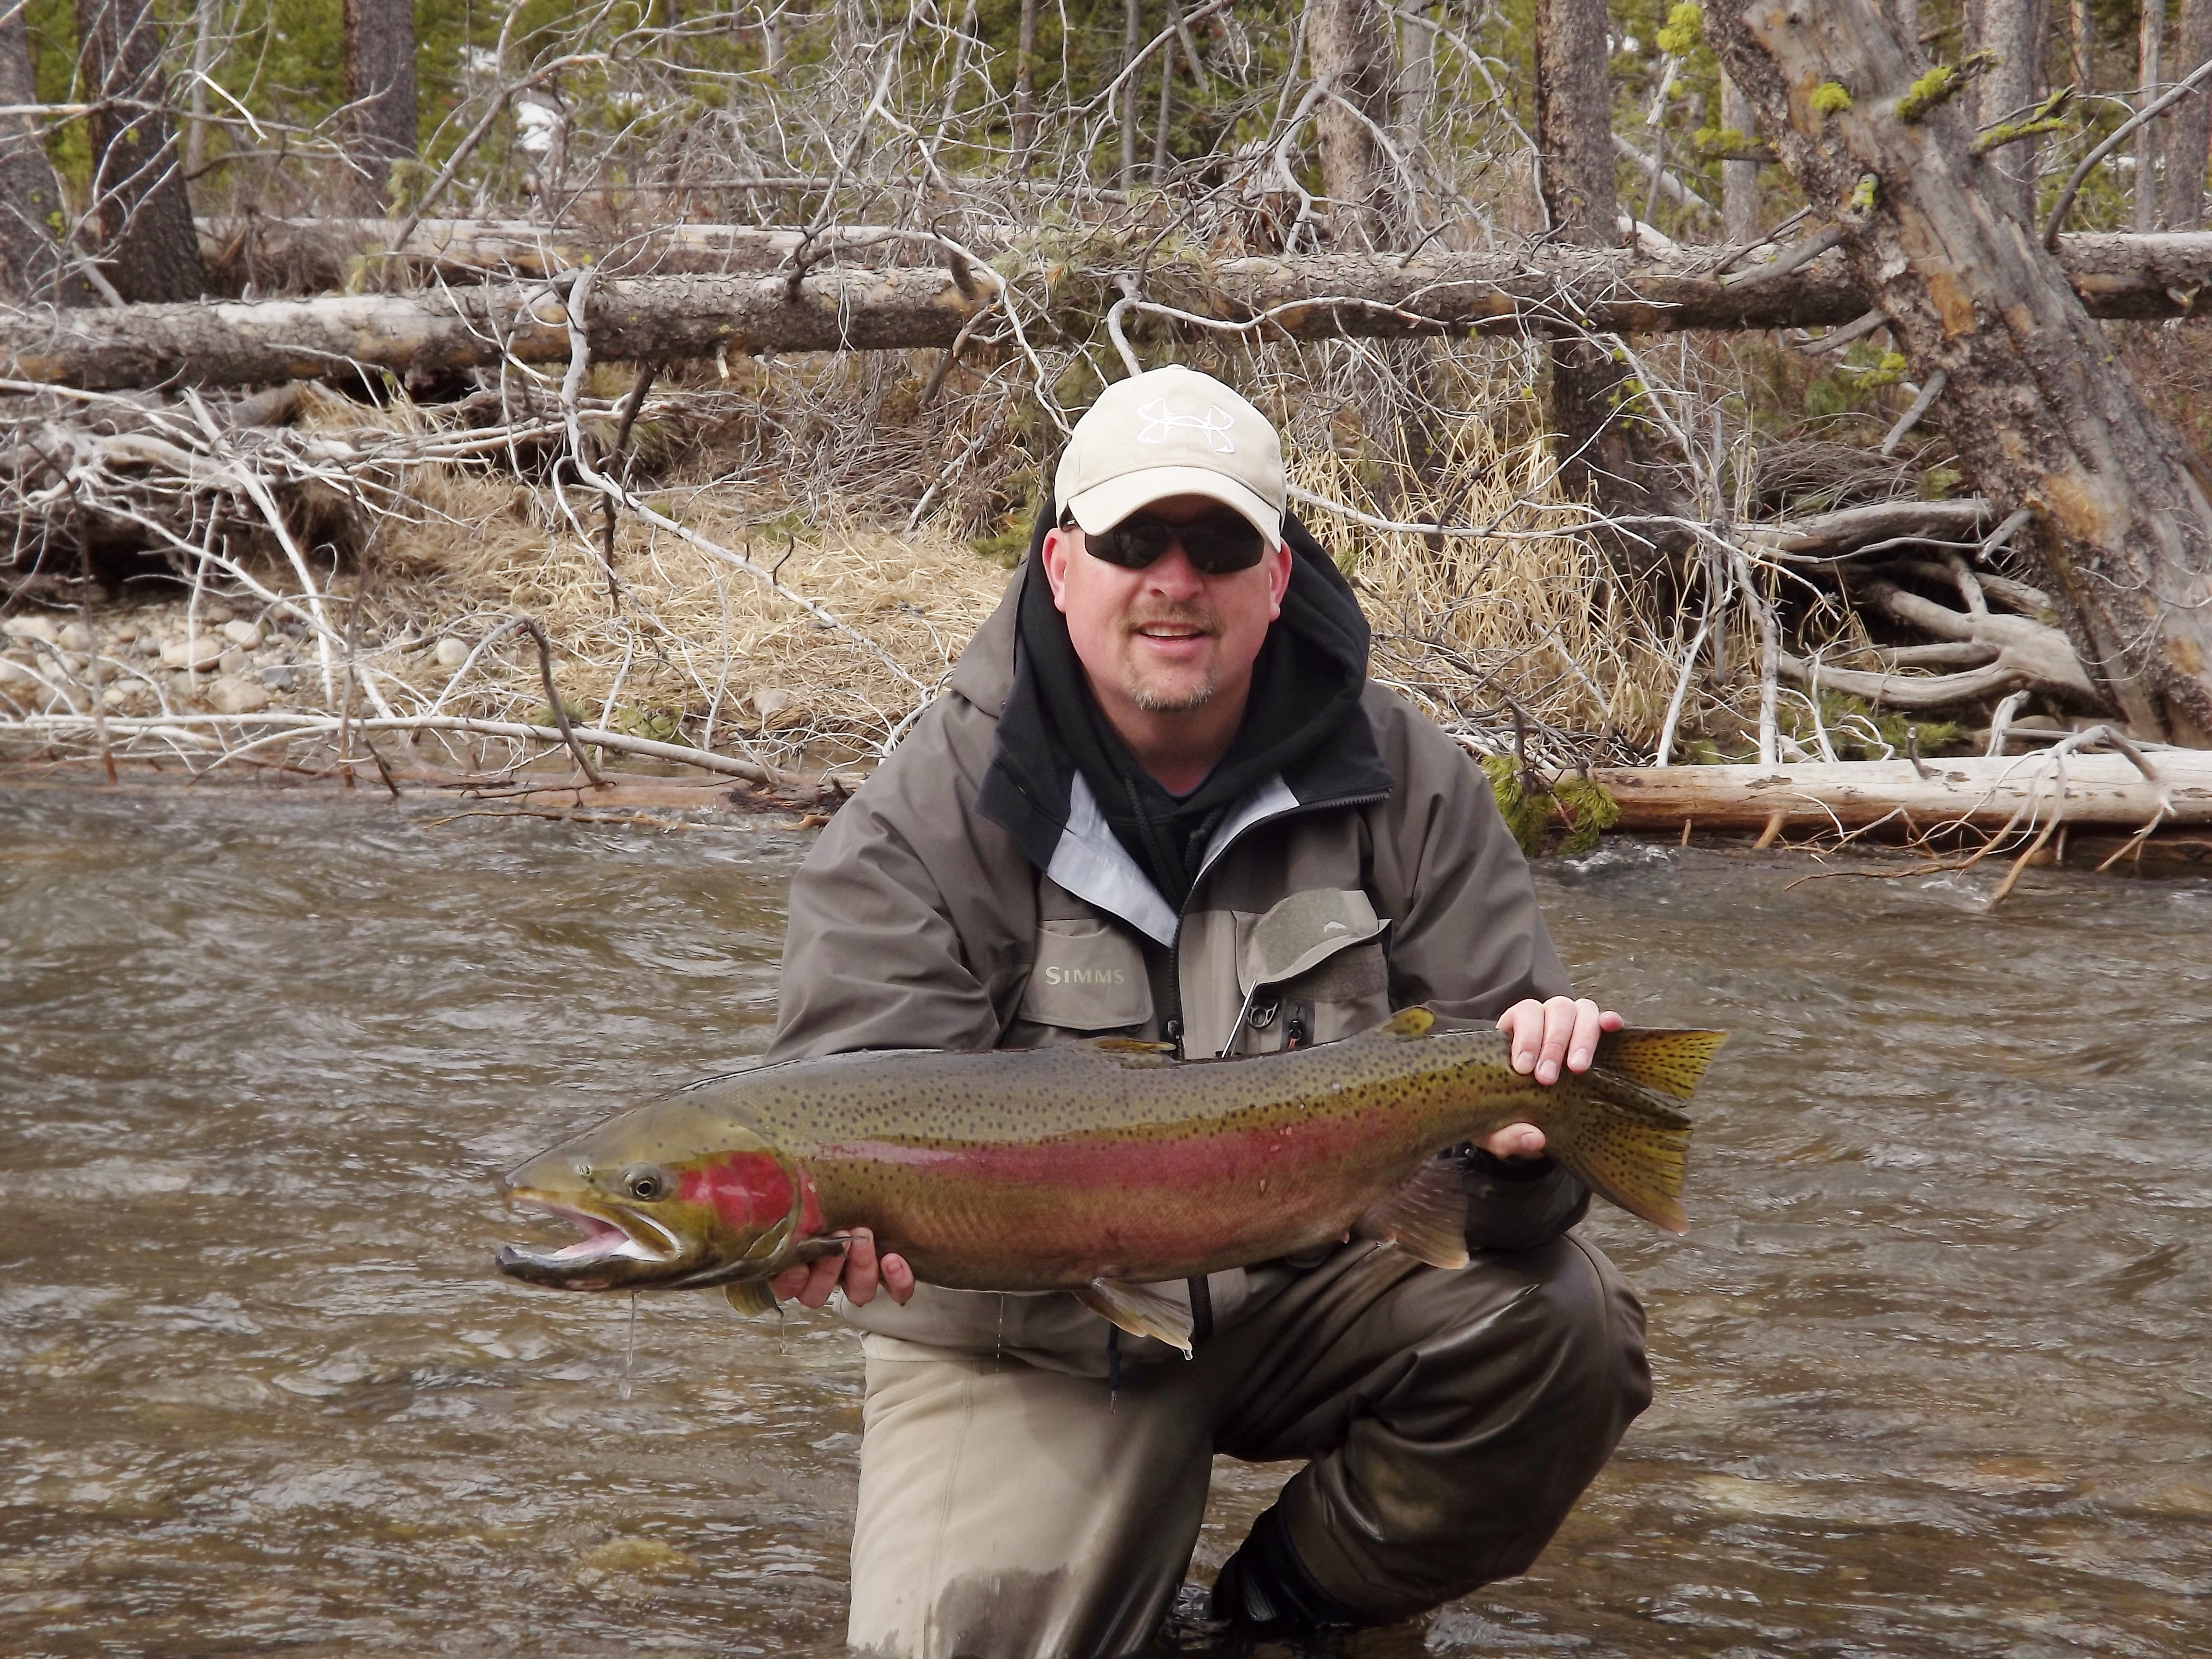 Fishing for steelhead on the upper Salmon River in 2013